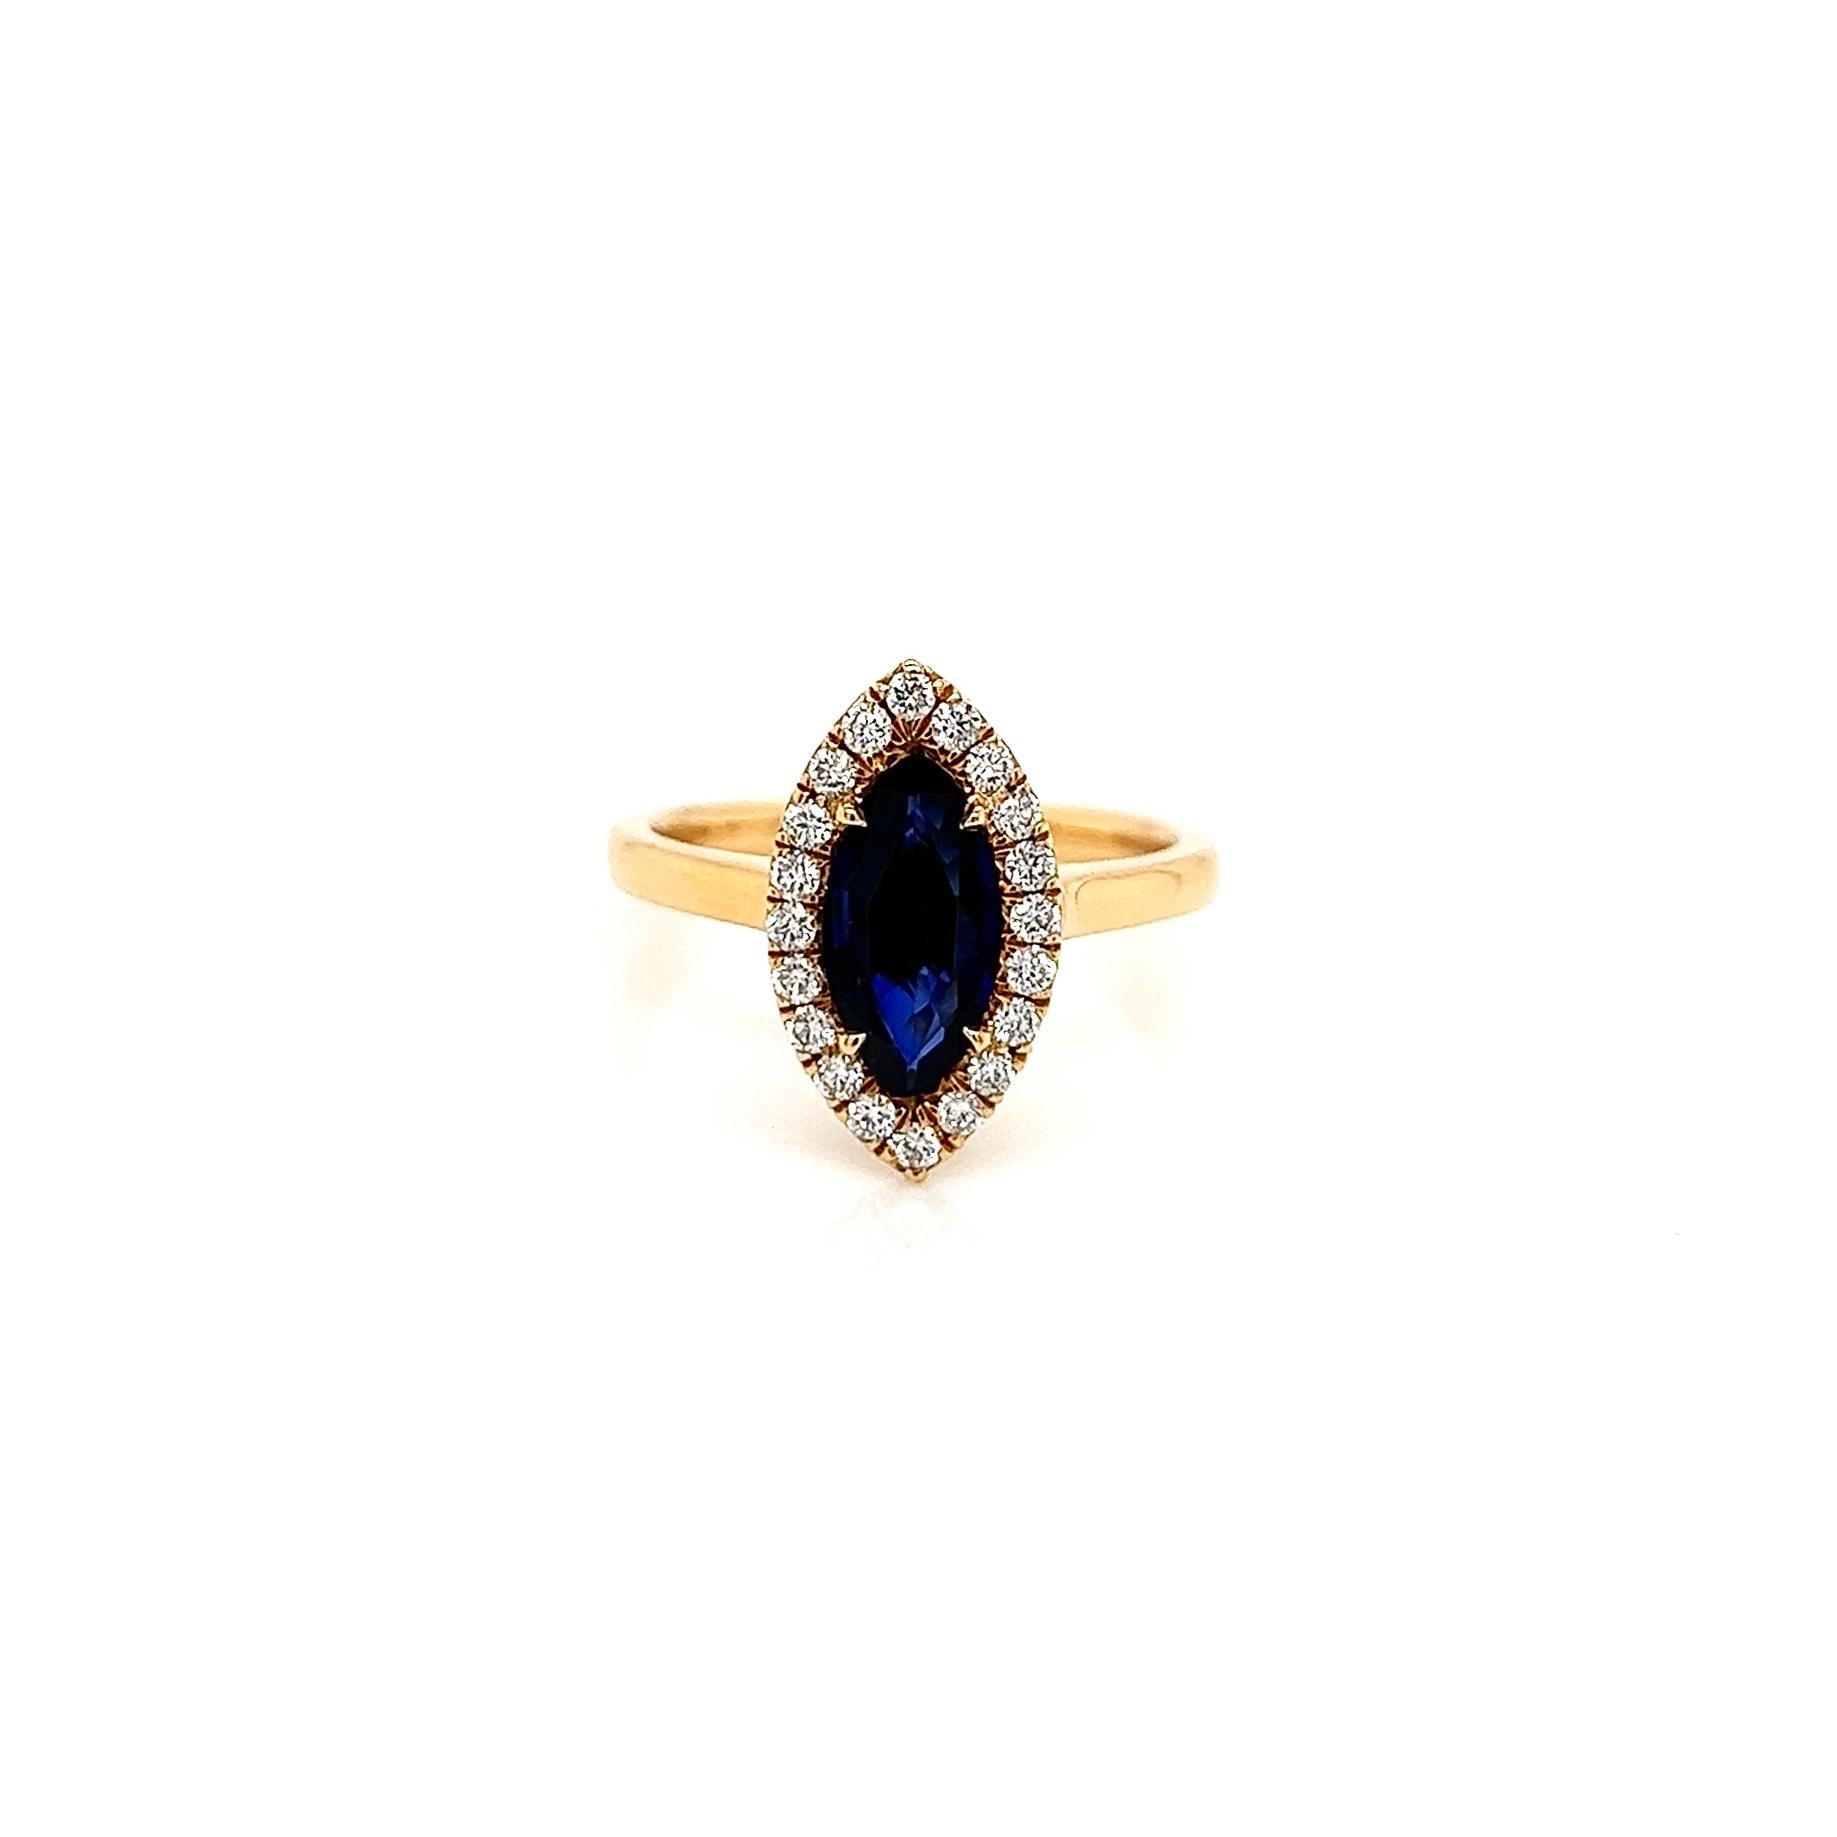 1.30 Total Carat Sapphire Diamond Engagement Ring

This unique engagement ring is features a dramatic marquise shaped blue sapphire surrounded by dazzling round shaped diamonds. This ring is the perfect blend of timeless and contemporary